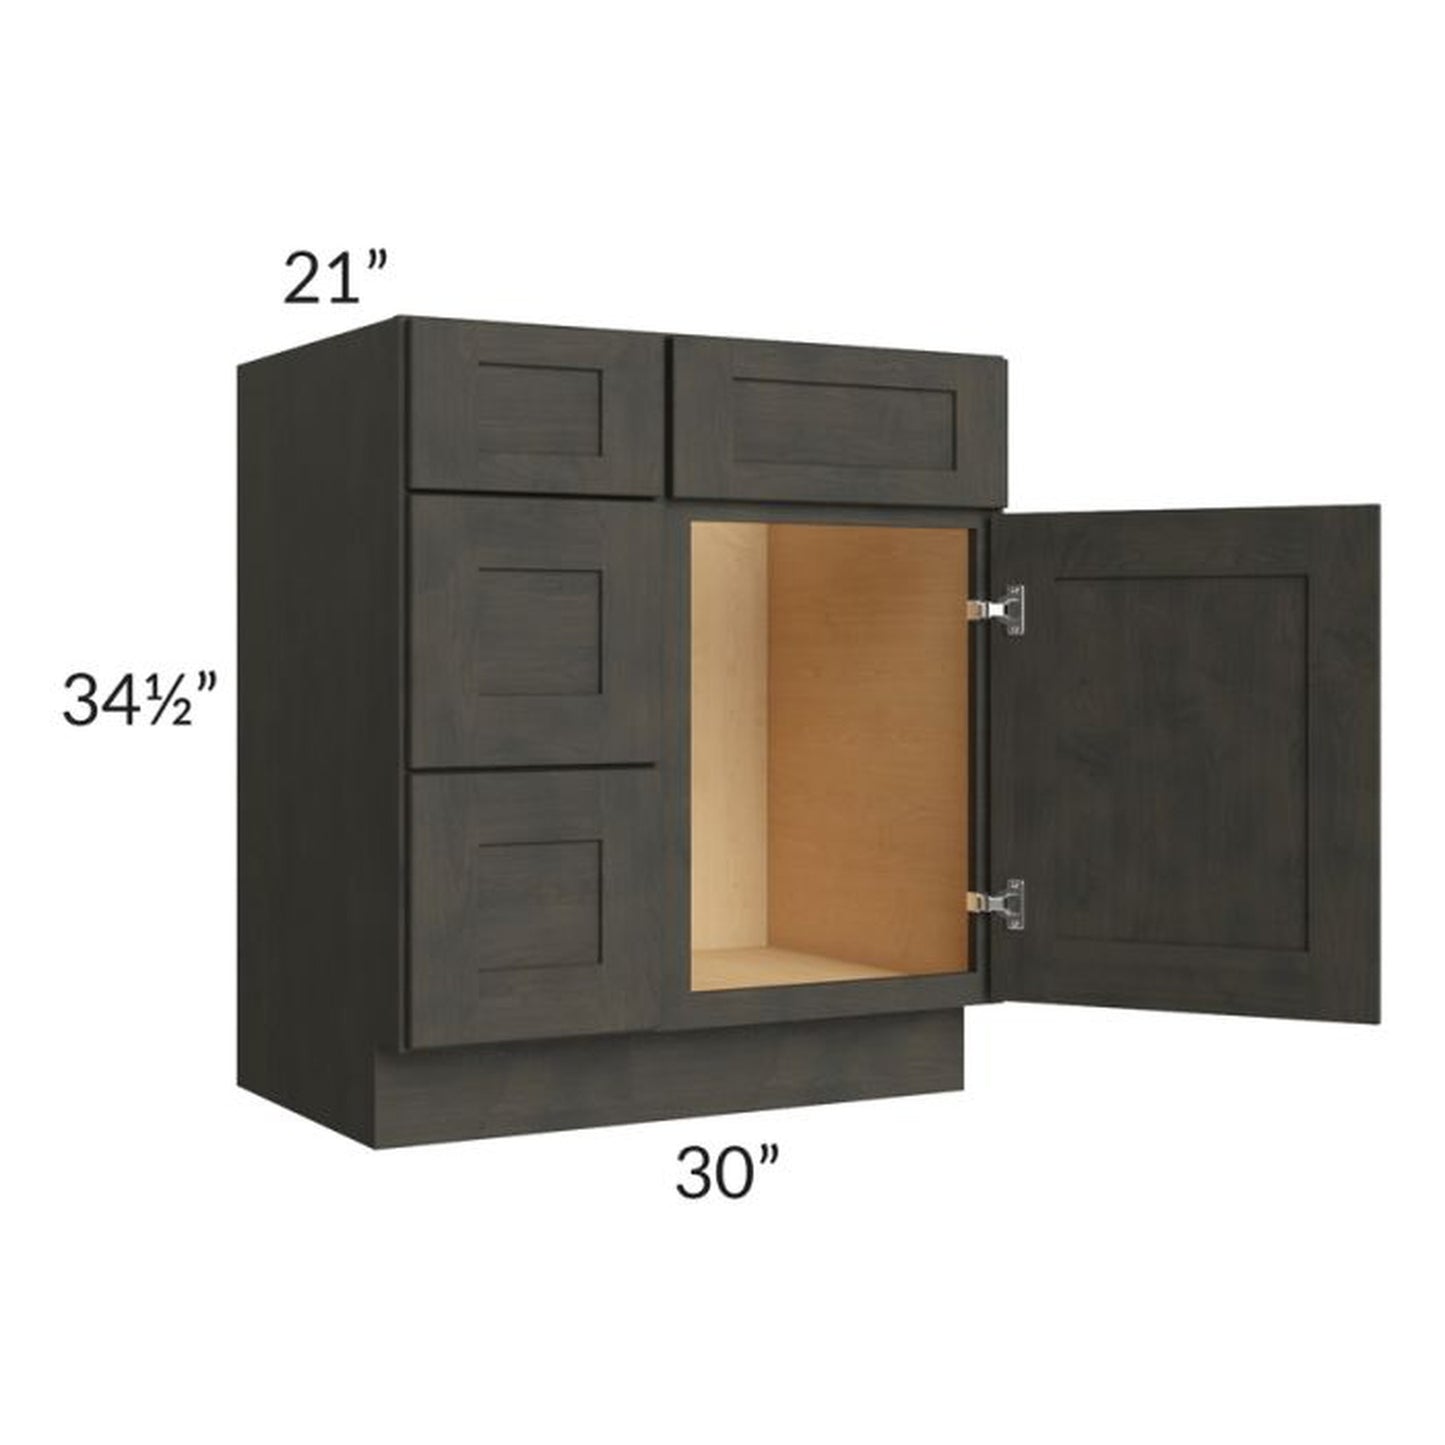 RTA Charcoal Grey Shaker 30" Vanity Base Cabinet (Drawers on Left) with 1 Decorative End Panel